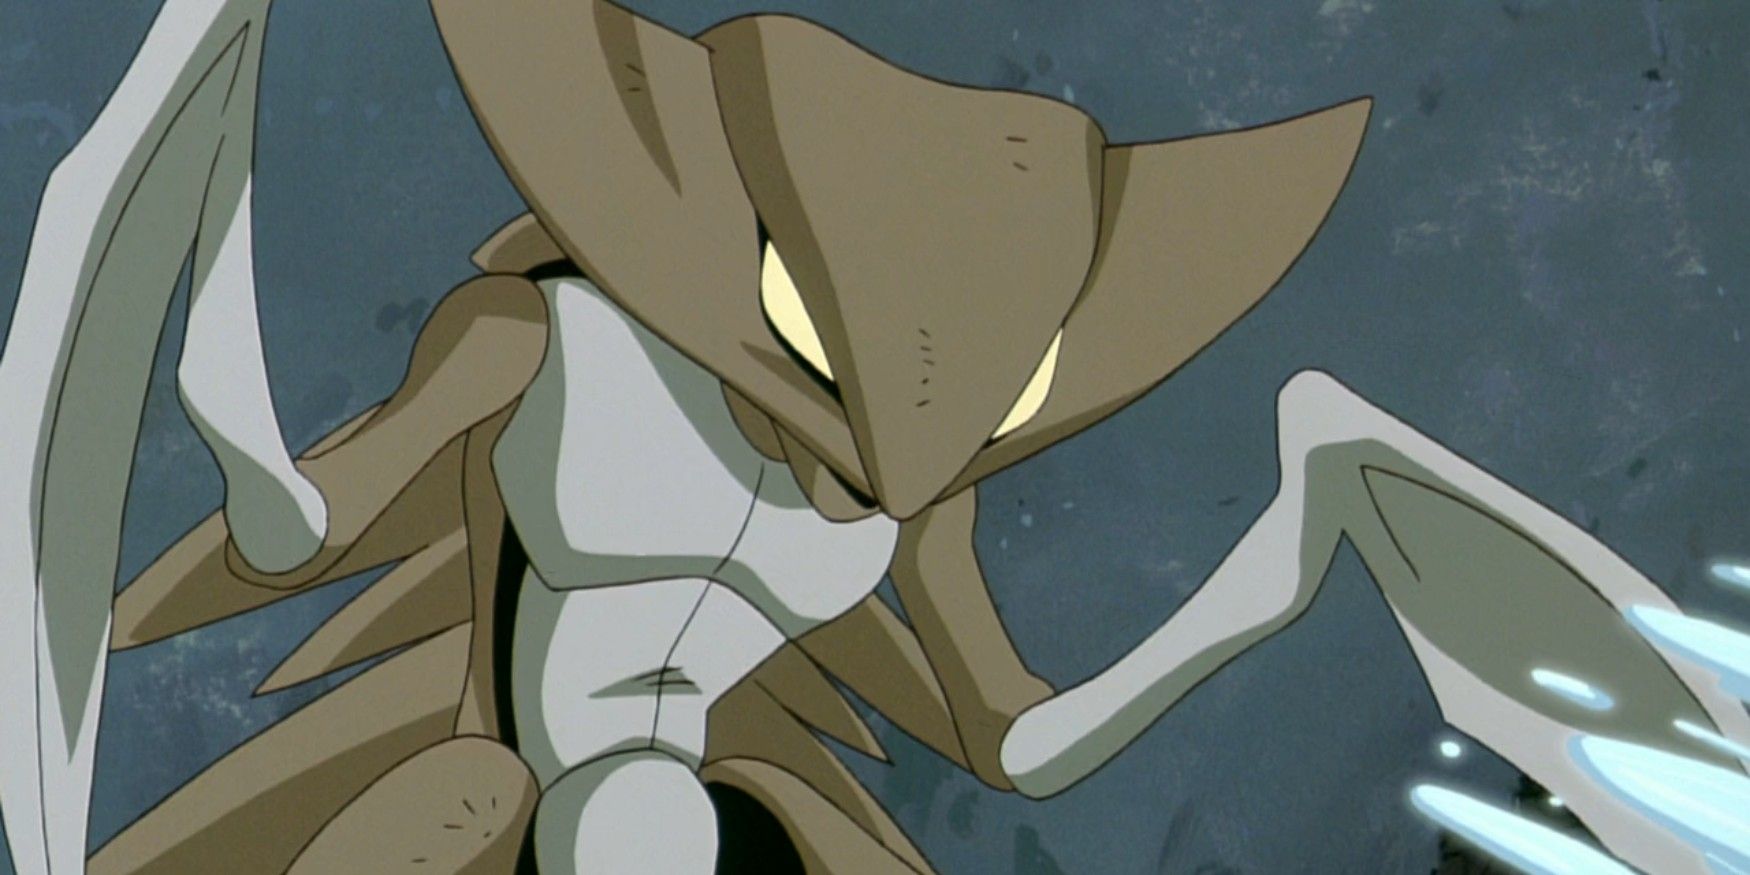 Kabutops from the Pokemon anime with glowing eyes.